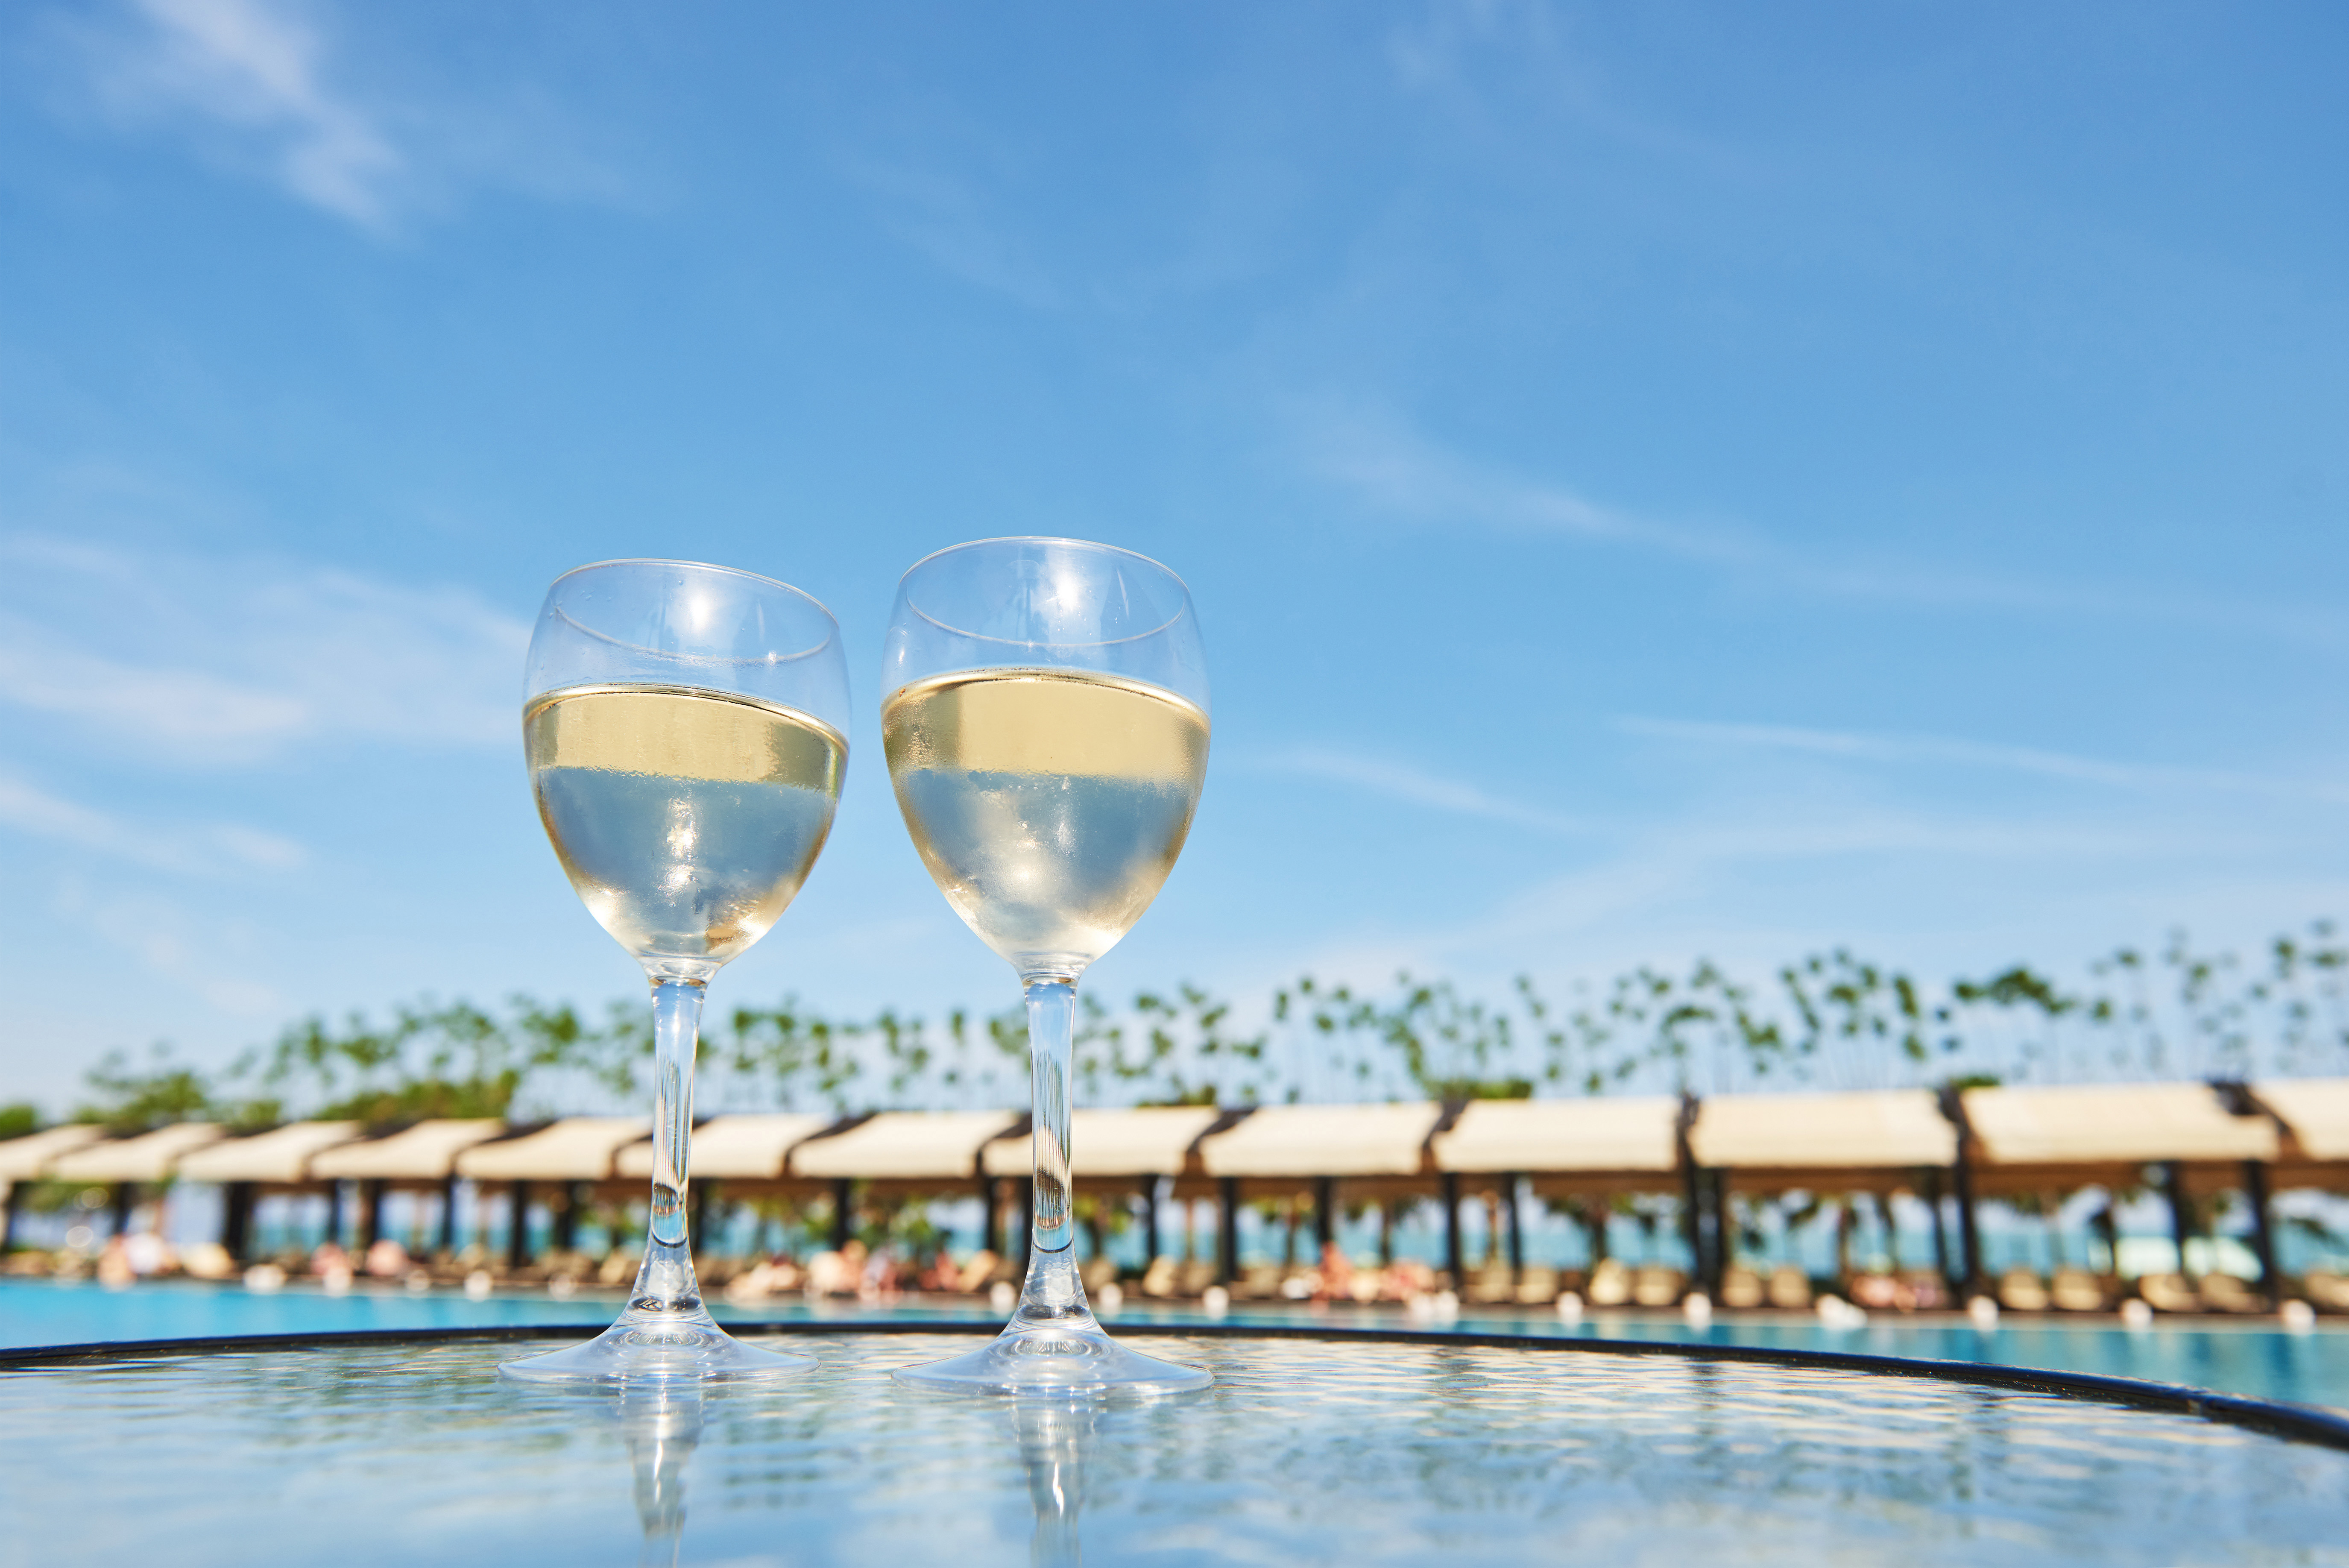 Glasses Of Champagne At A Resort Pool In A Luxury Hotel. Party By The Pool. Pouring Drink In A Glass. Amara Dolce Vita Luxury Hotel. Resort. Tekirova Kemer - Notícias e Artigos Contábeis na Zona Leste - SP | Vance Contábil